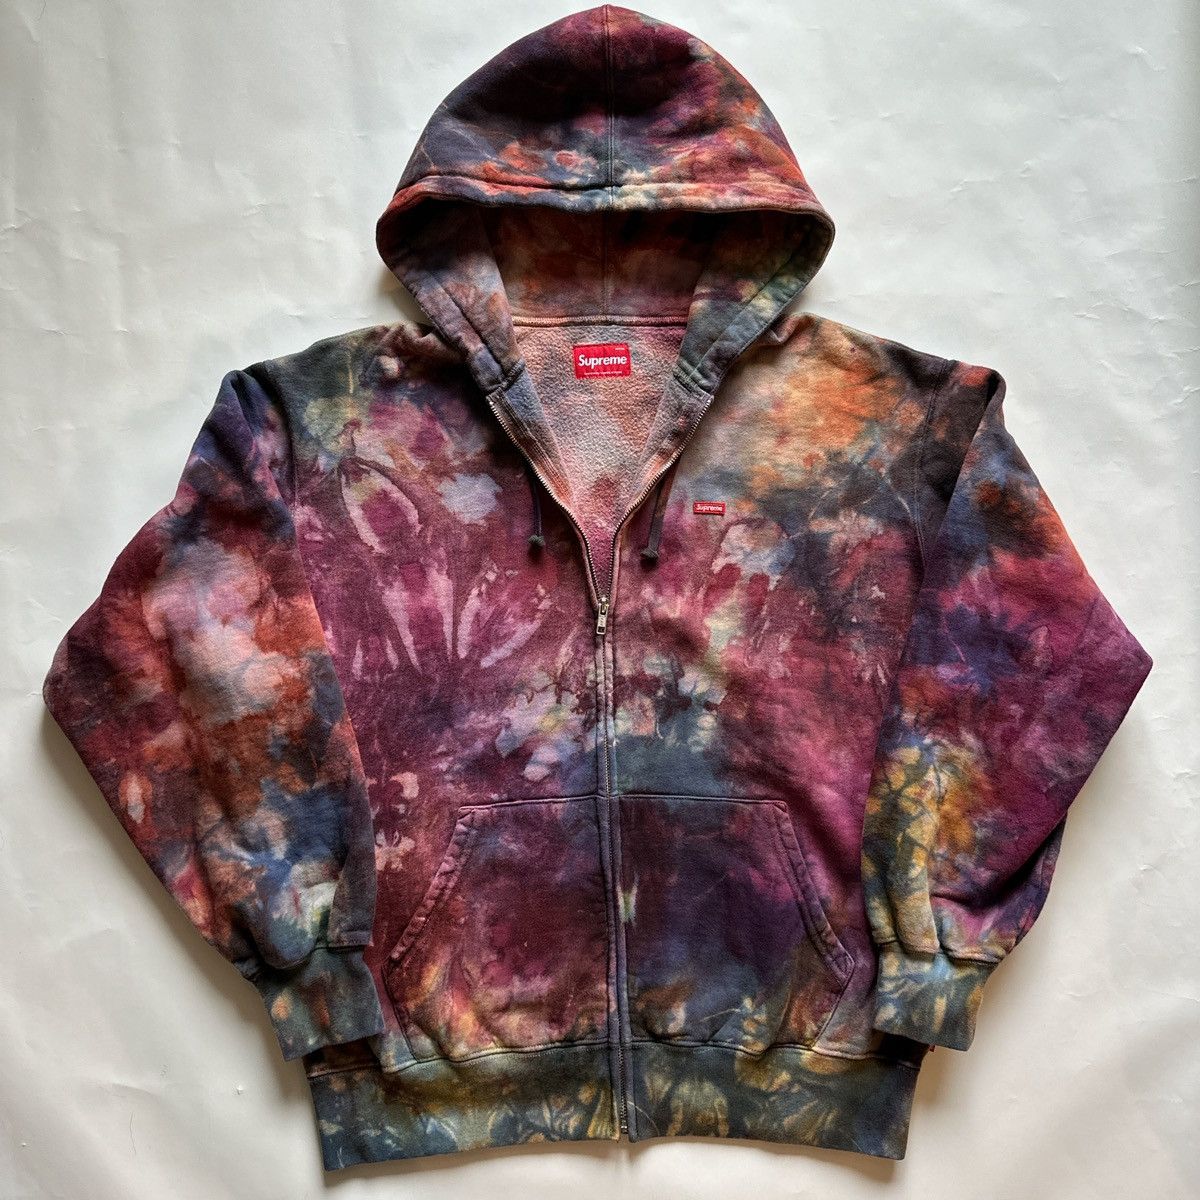 Supreme Supreme overdyed small box zip up hoodie tie dye SS24 | Grailed